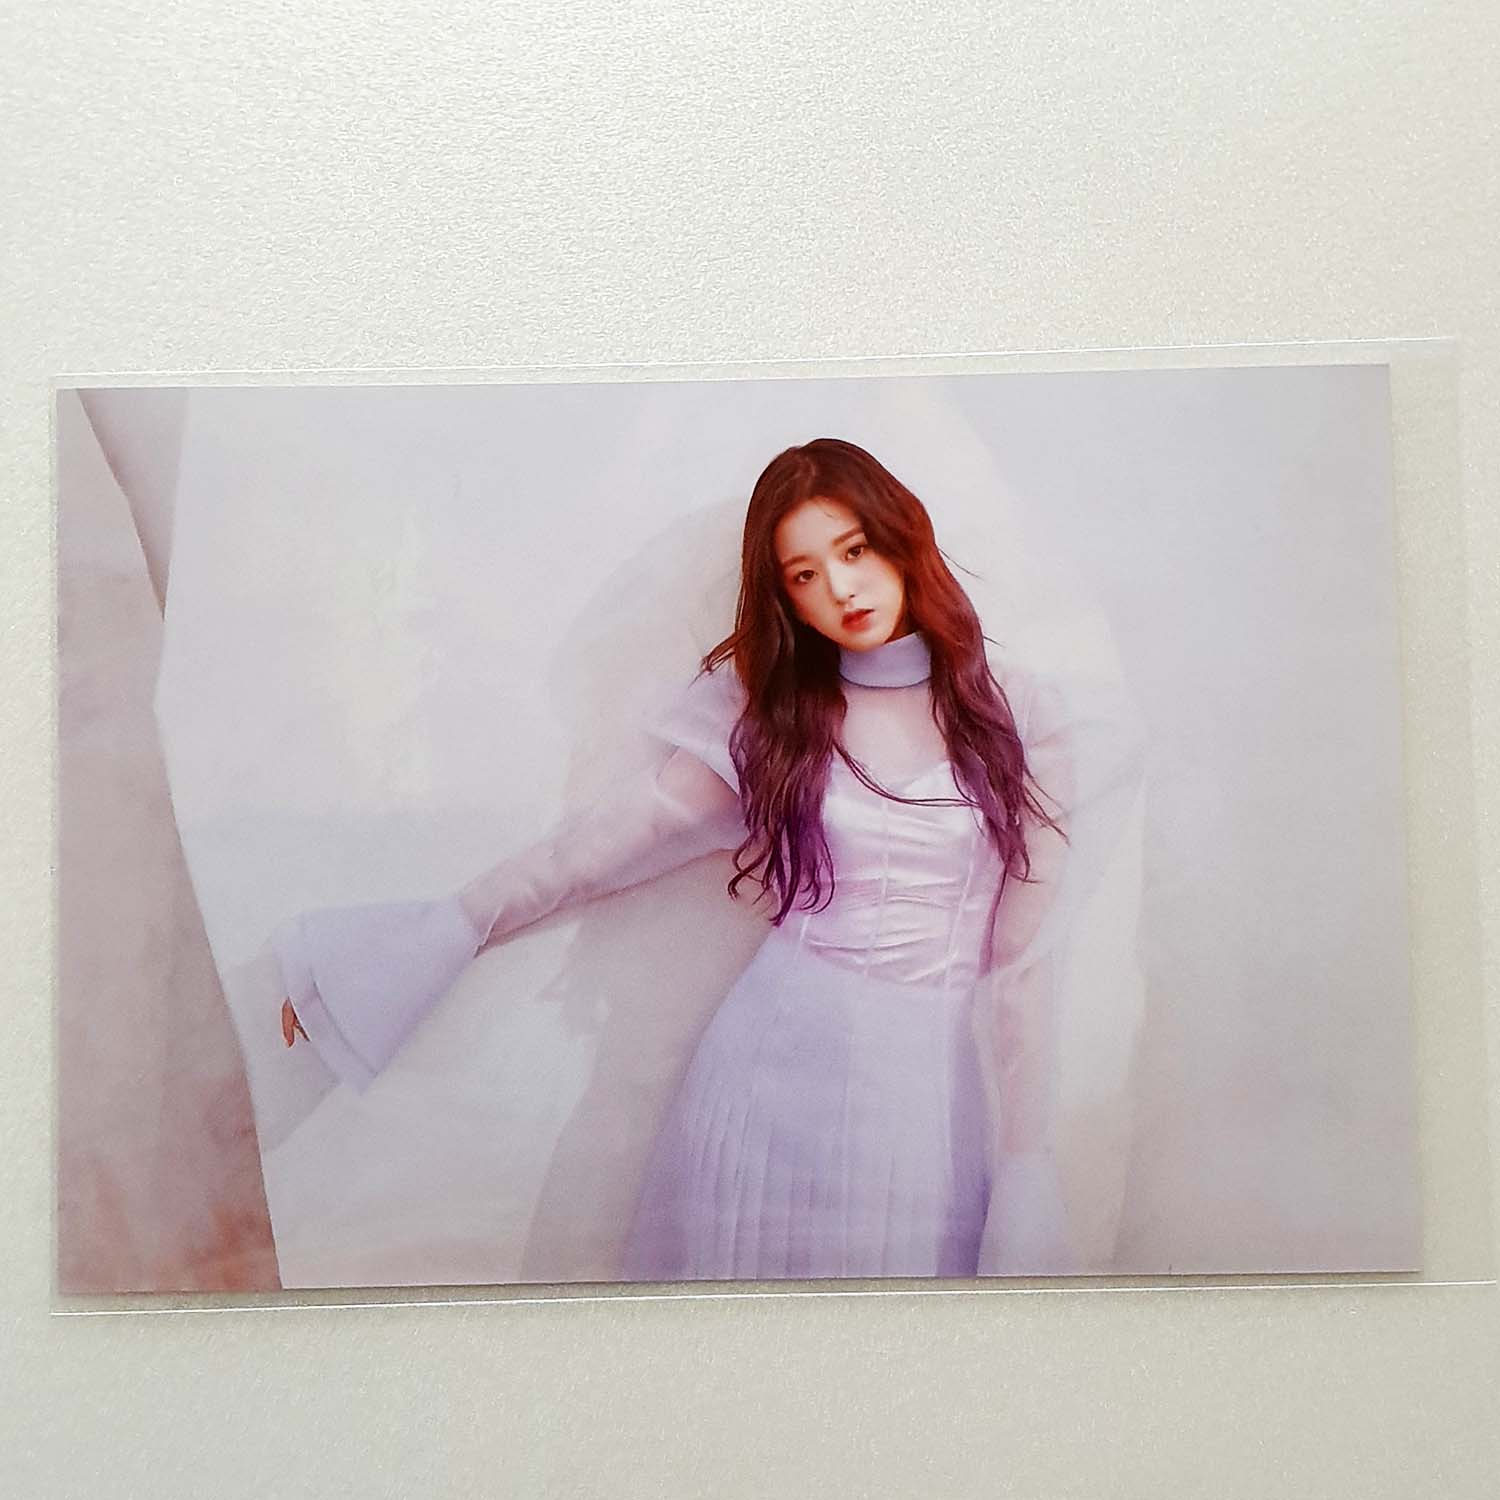 PRODUCE 値引 48 IZ ONE HEART POPUP Promotional Official JANGWONYOUNG Photo  Store